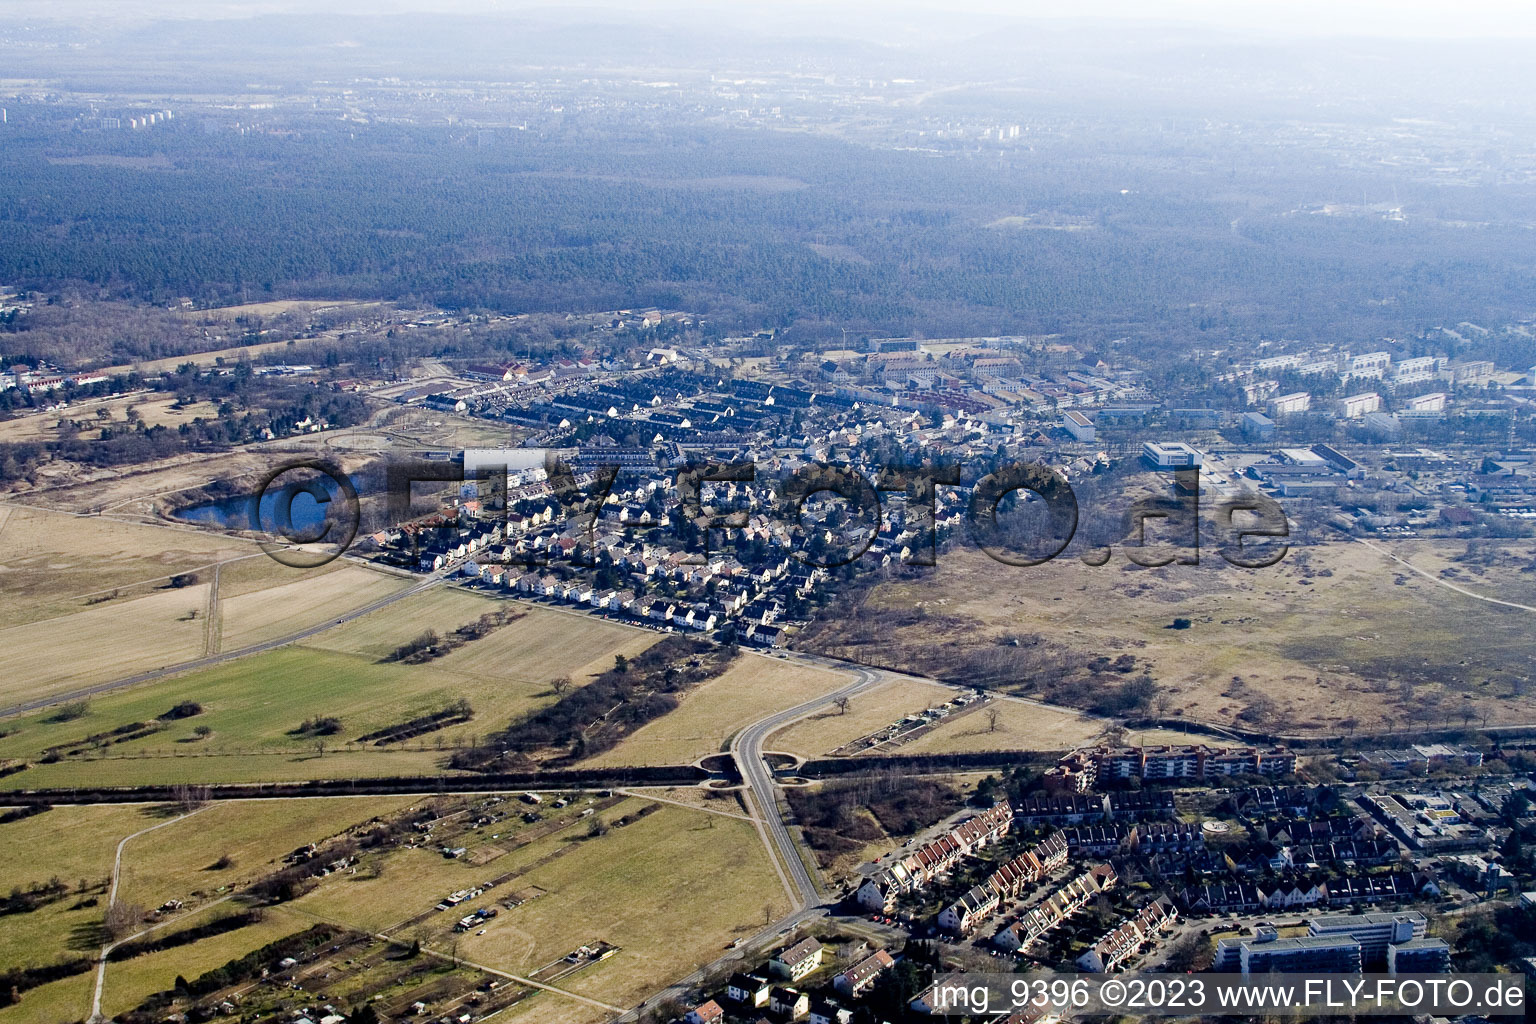 District Knielingen in Karlsruhe in the state Baden-Wuerttemberg, Germany from the drone perspective